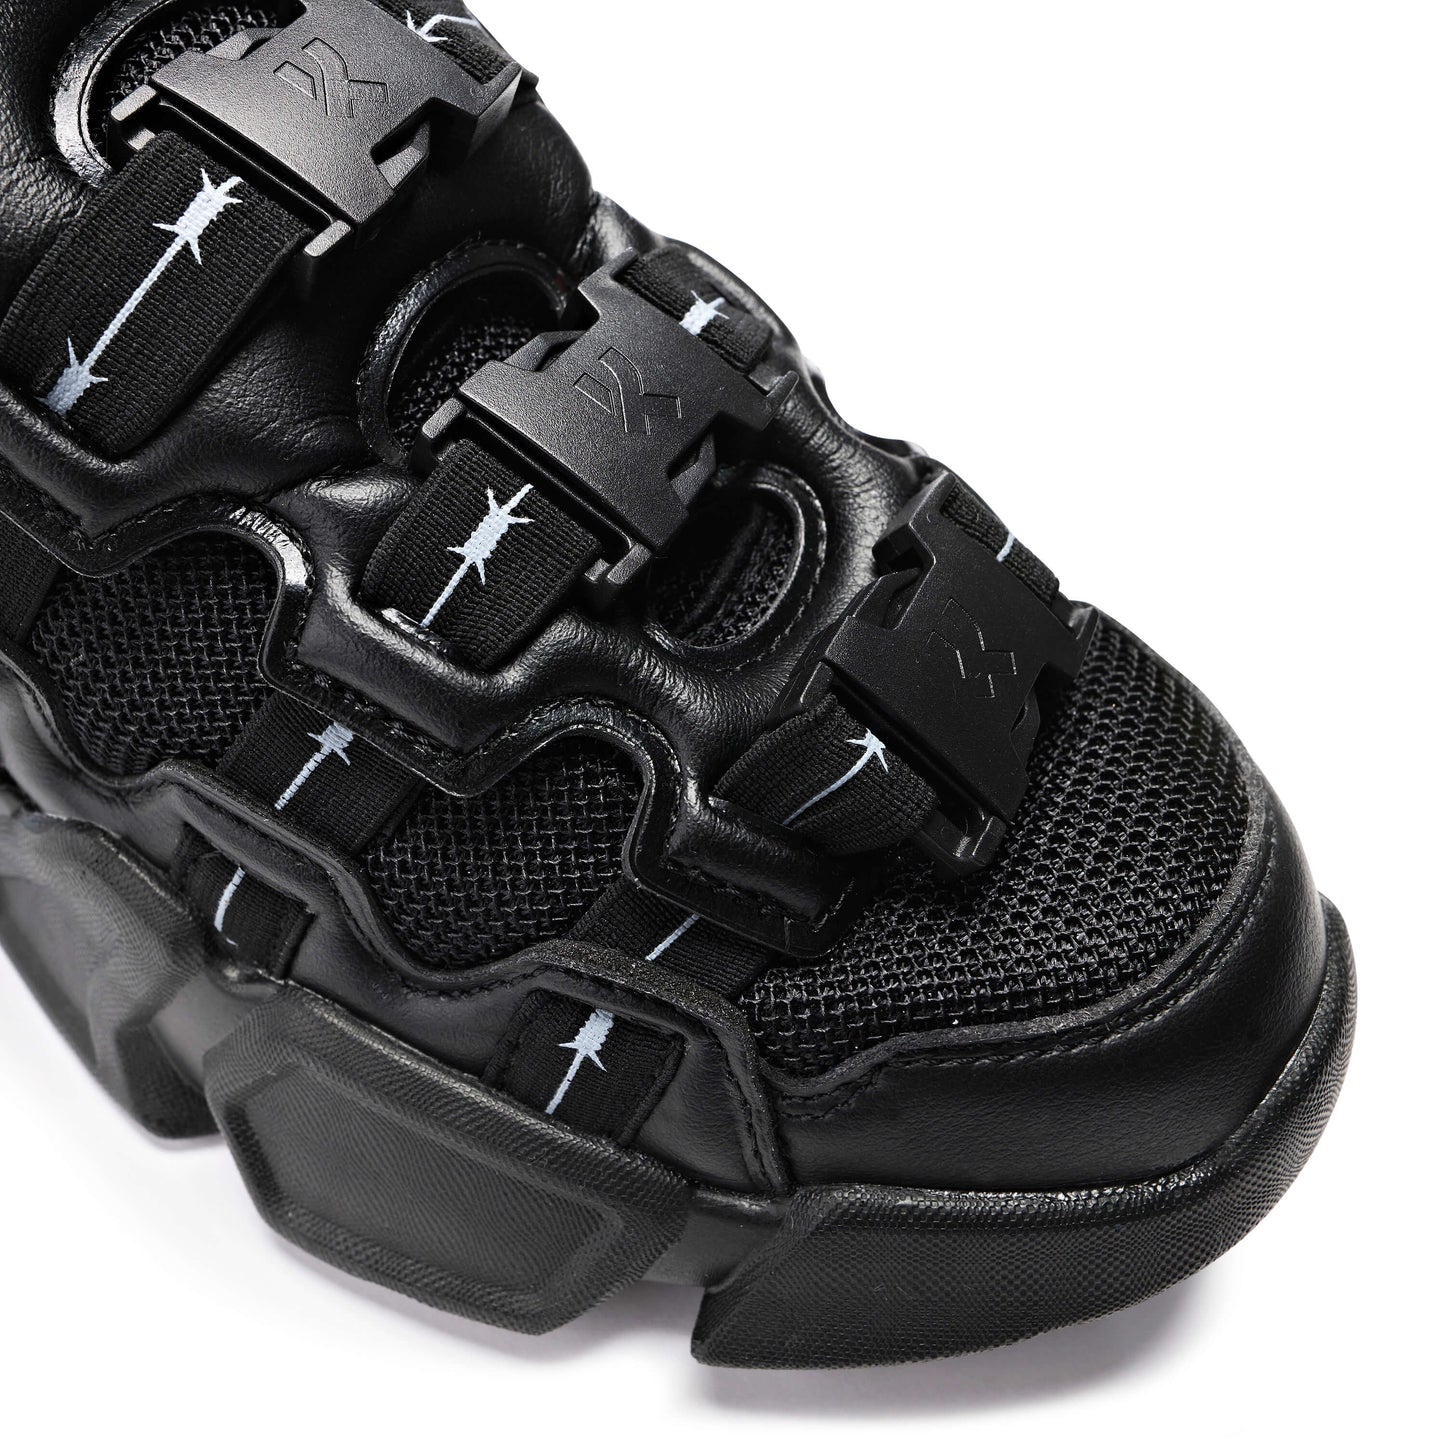 The Beast Men's Black Wire Trainers - Trainers - KOI Footwear - Black - Front Detail